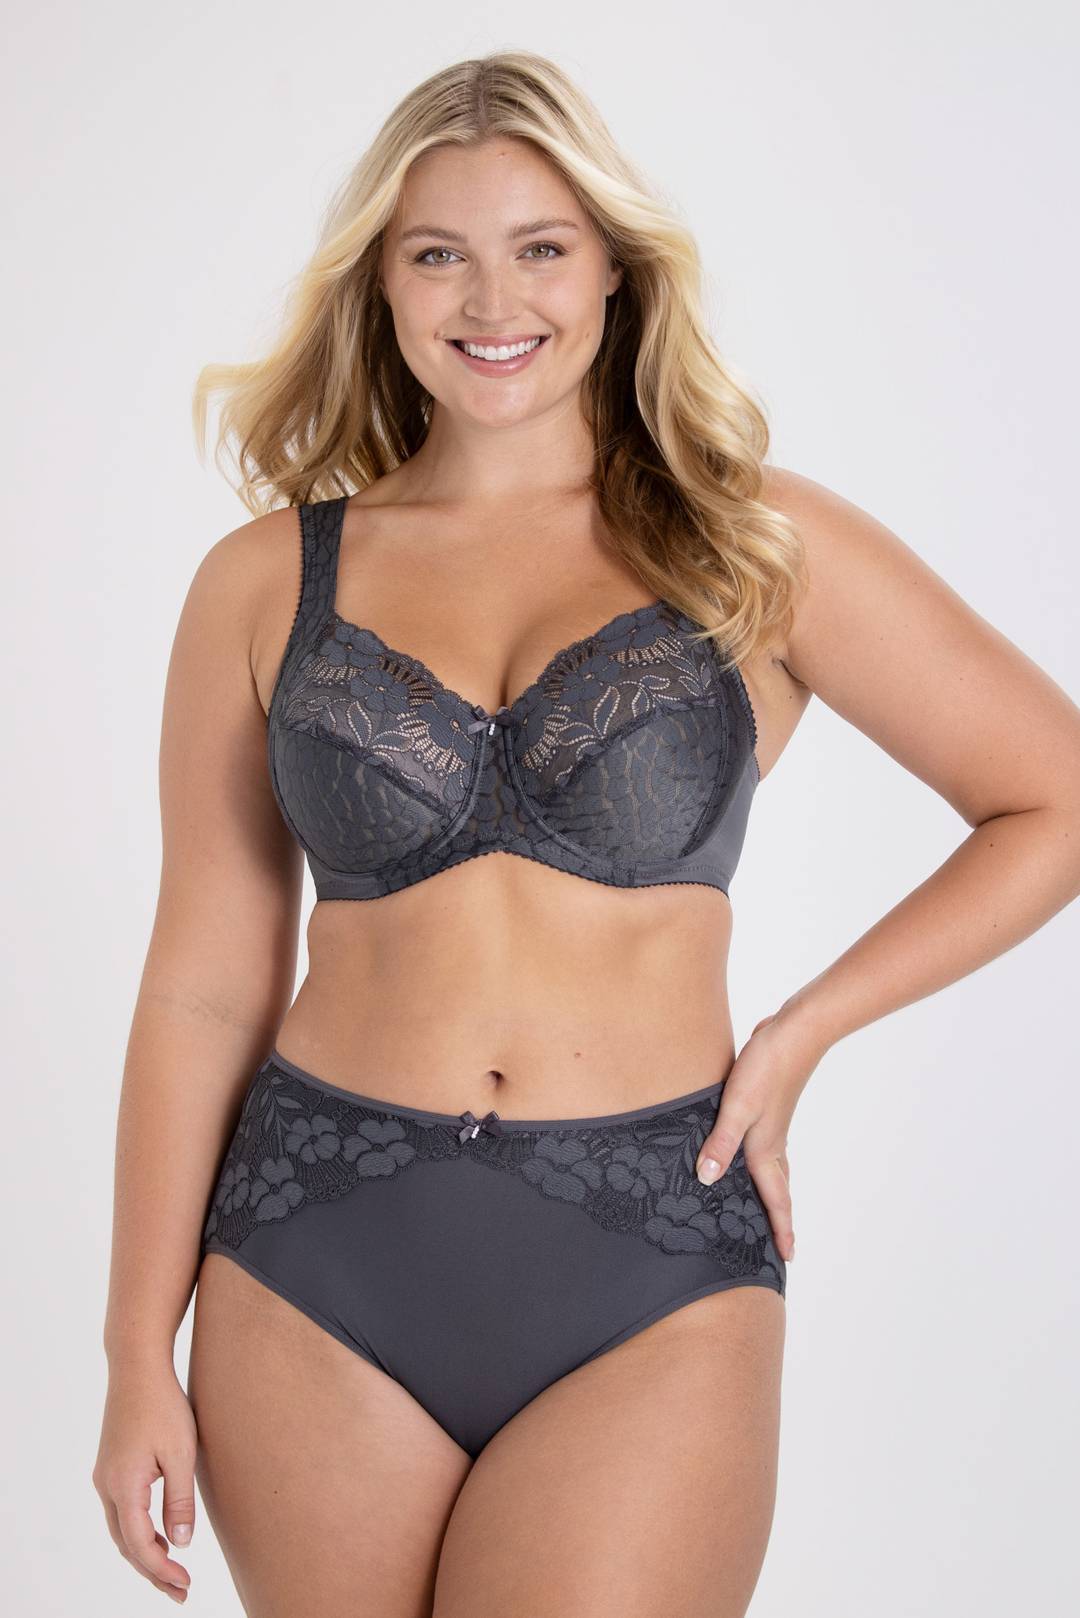 Jacquard & Lace – luxurious underwired bra that provides plenty of